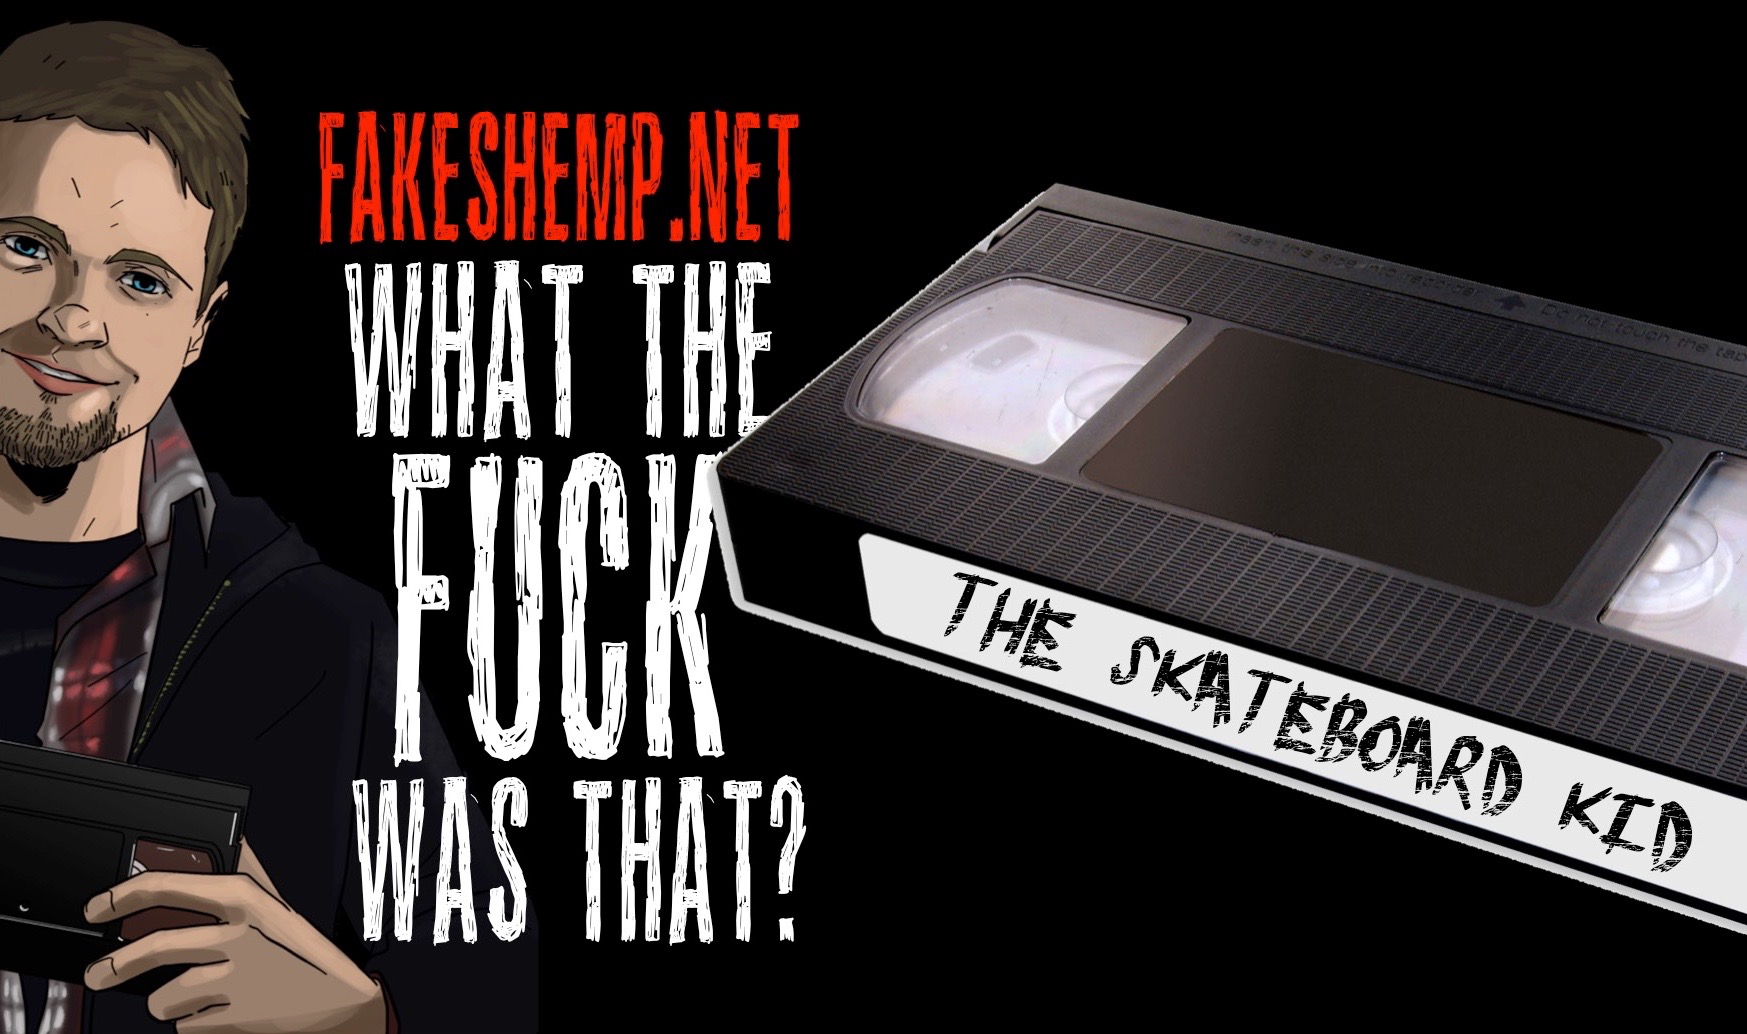 WTF WAS THAT? - The Skateboard Kid